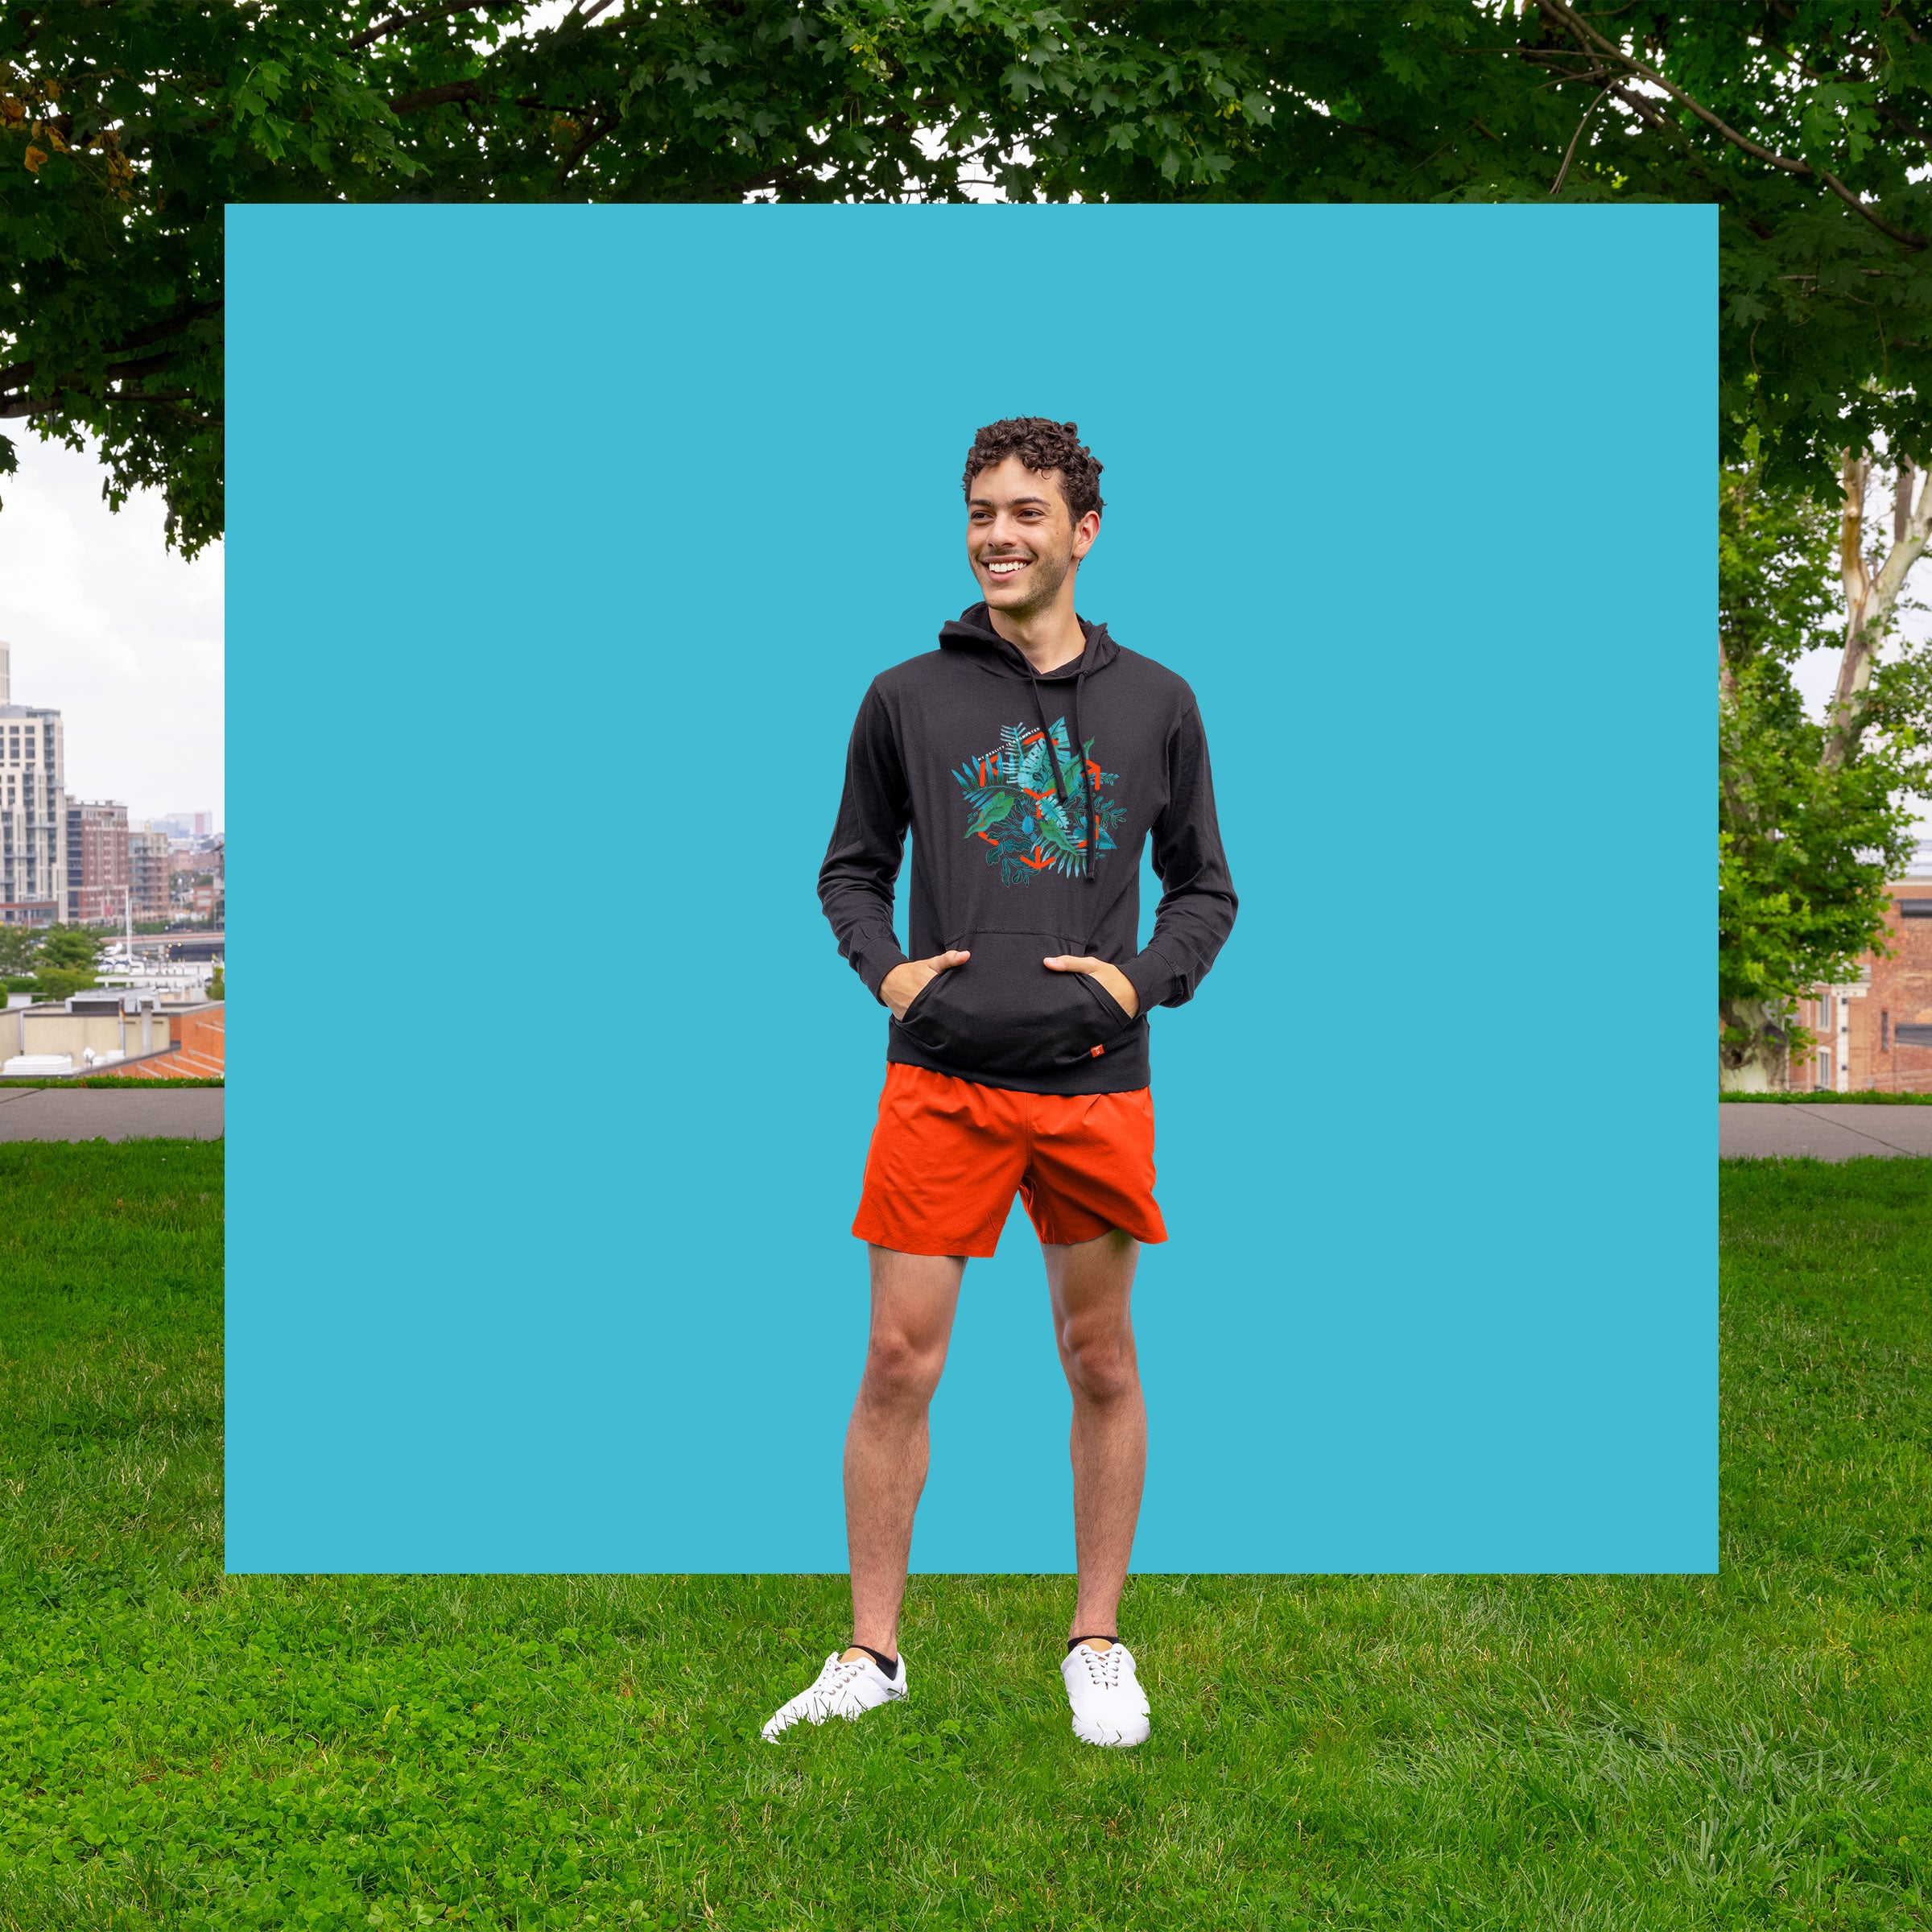 niantic exploration ar pullover hoodie on model in front of blue square